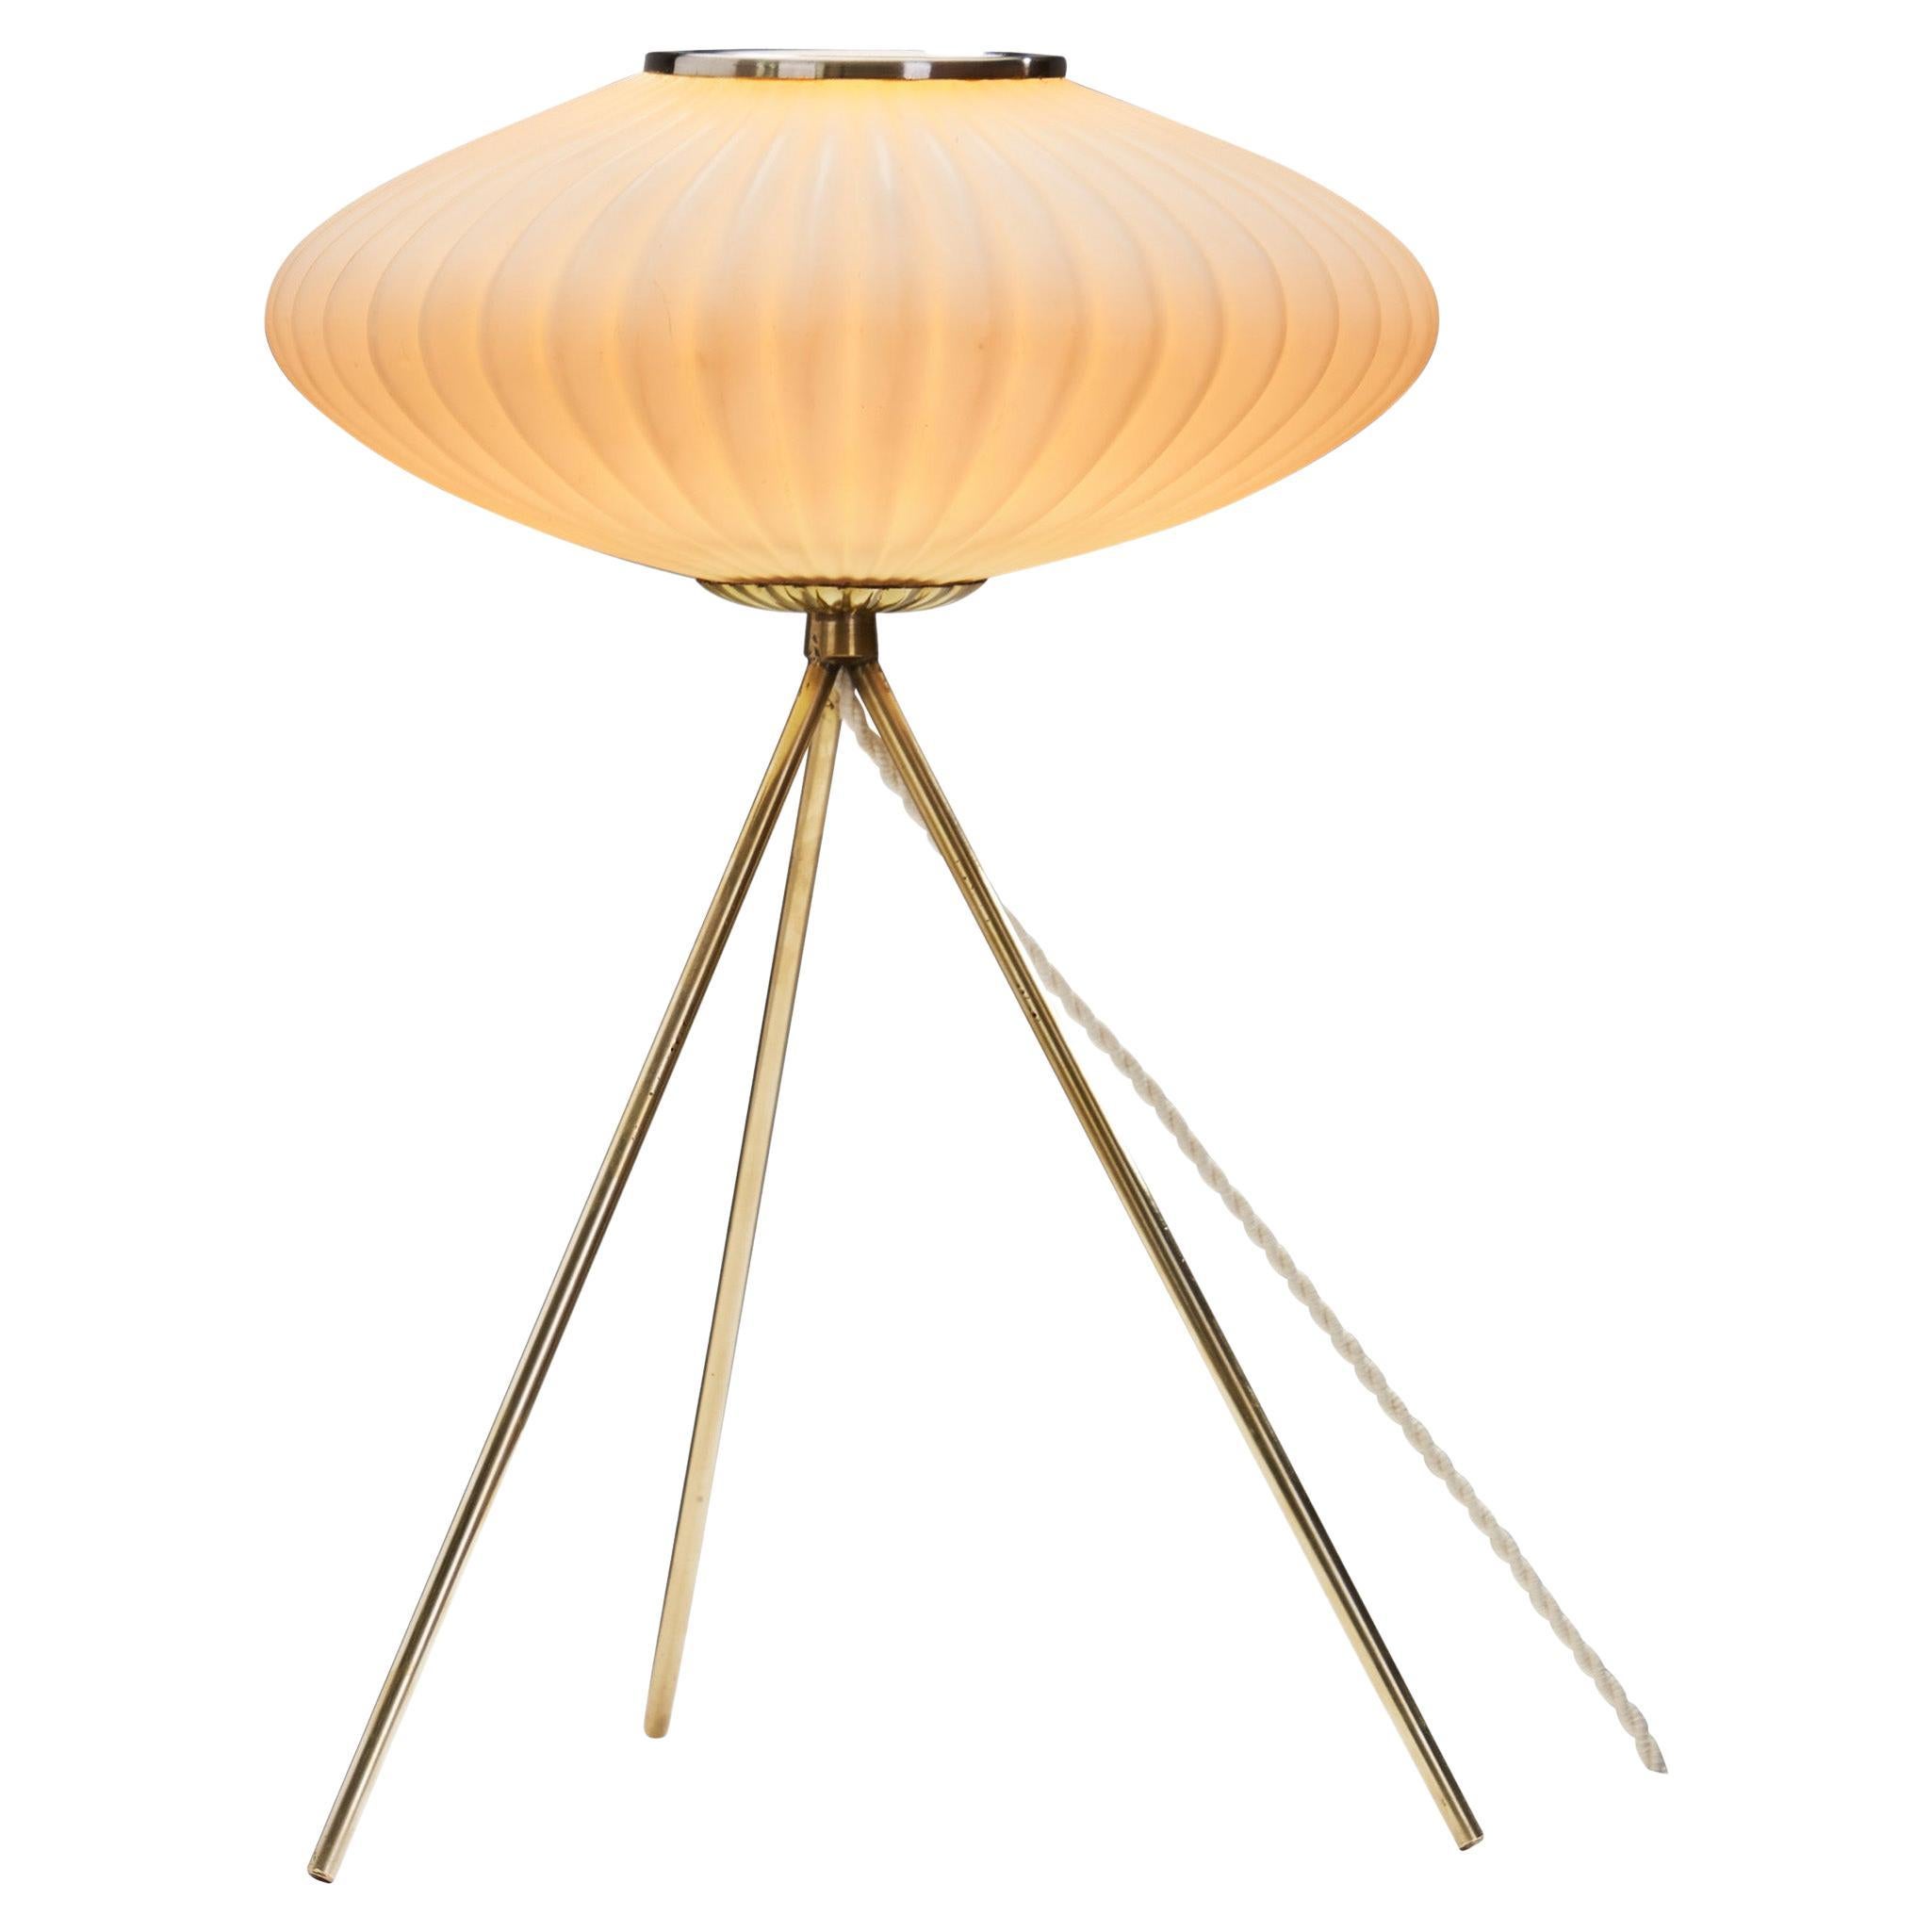 European Modern Tripod Table Lamp with Opal Glass Shade, Europe 1960s For Sale